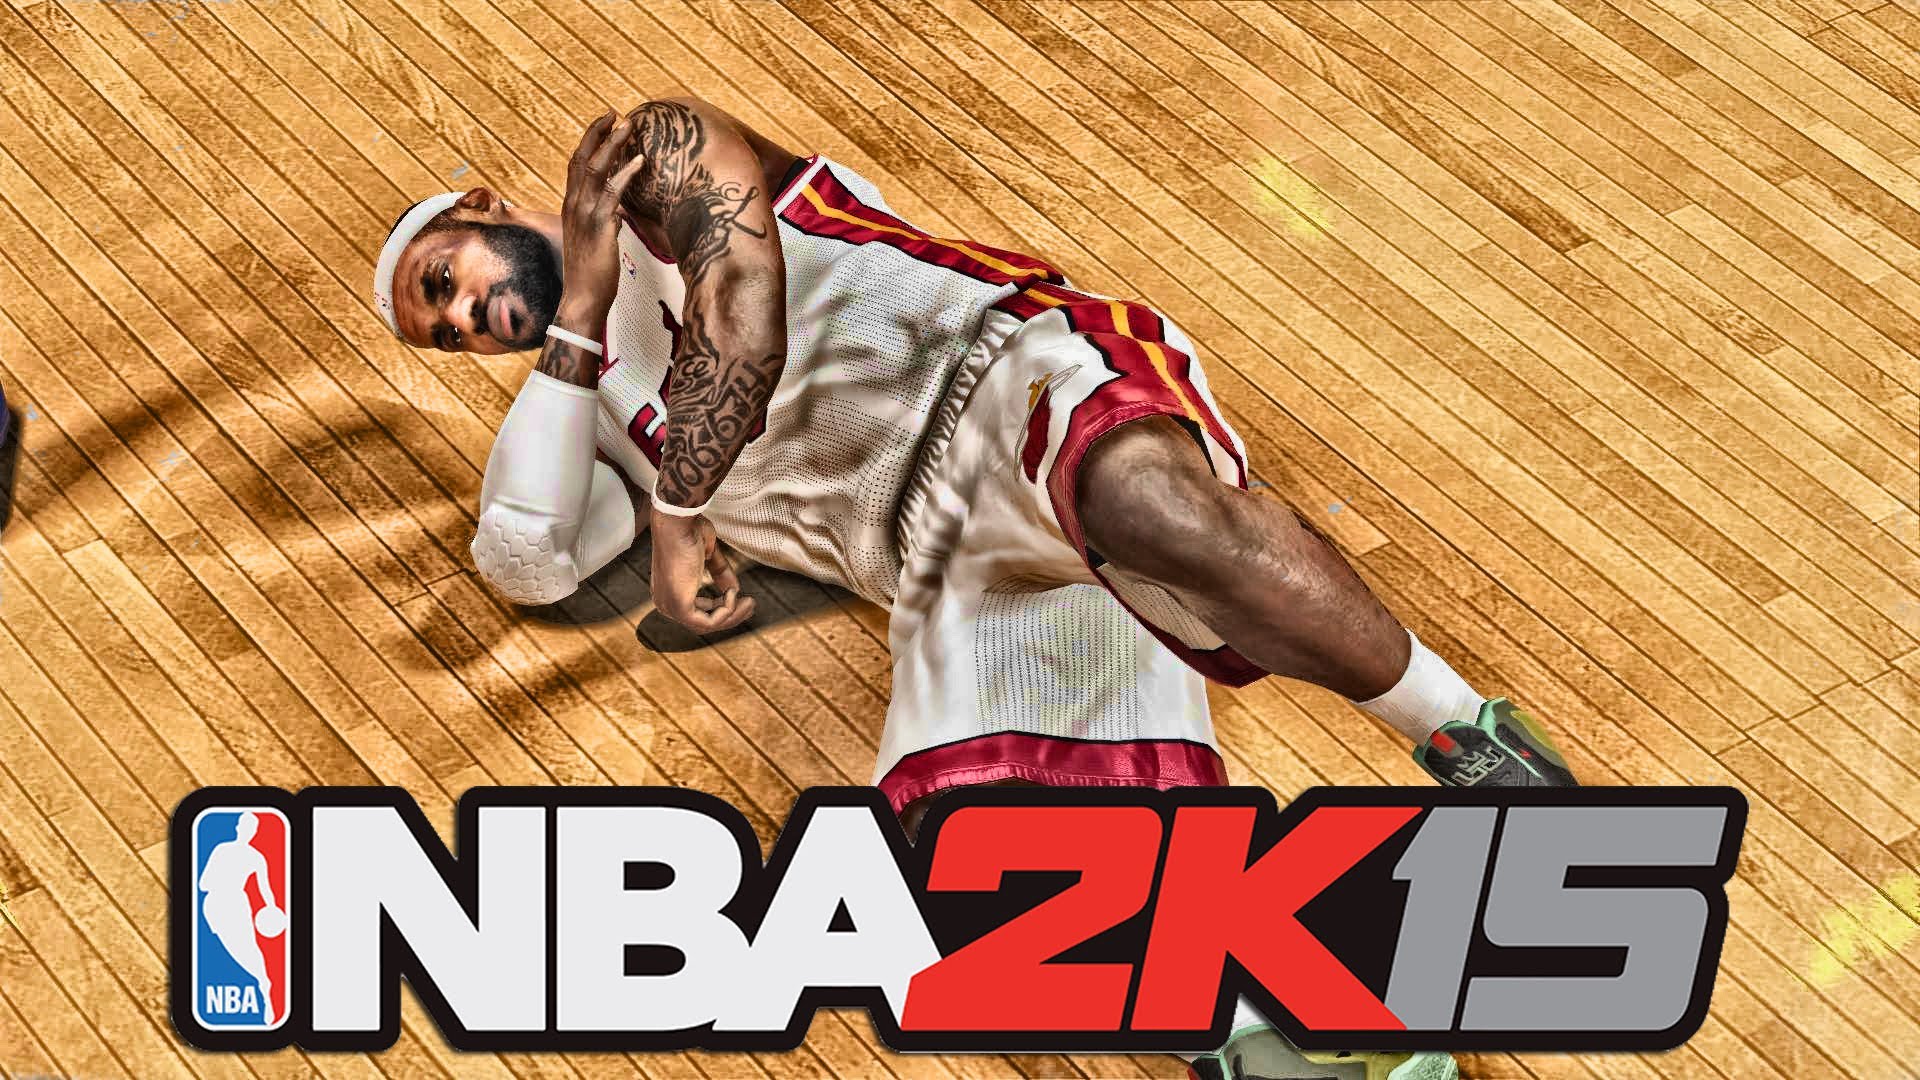 NBA 2K15 - Stronger Trailer and Gameplay - YouTube